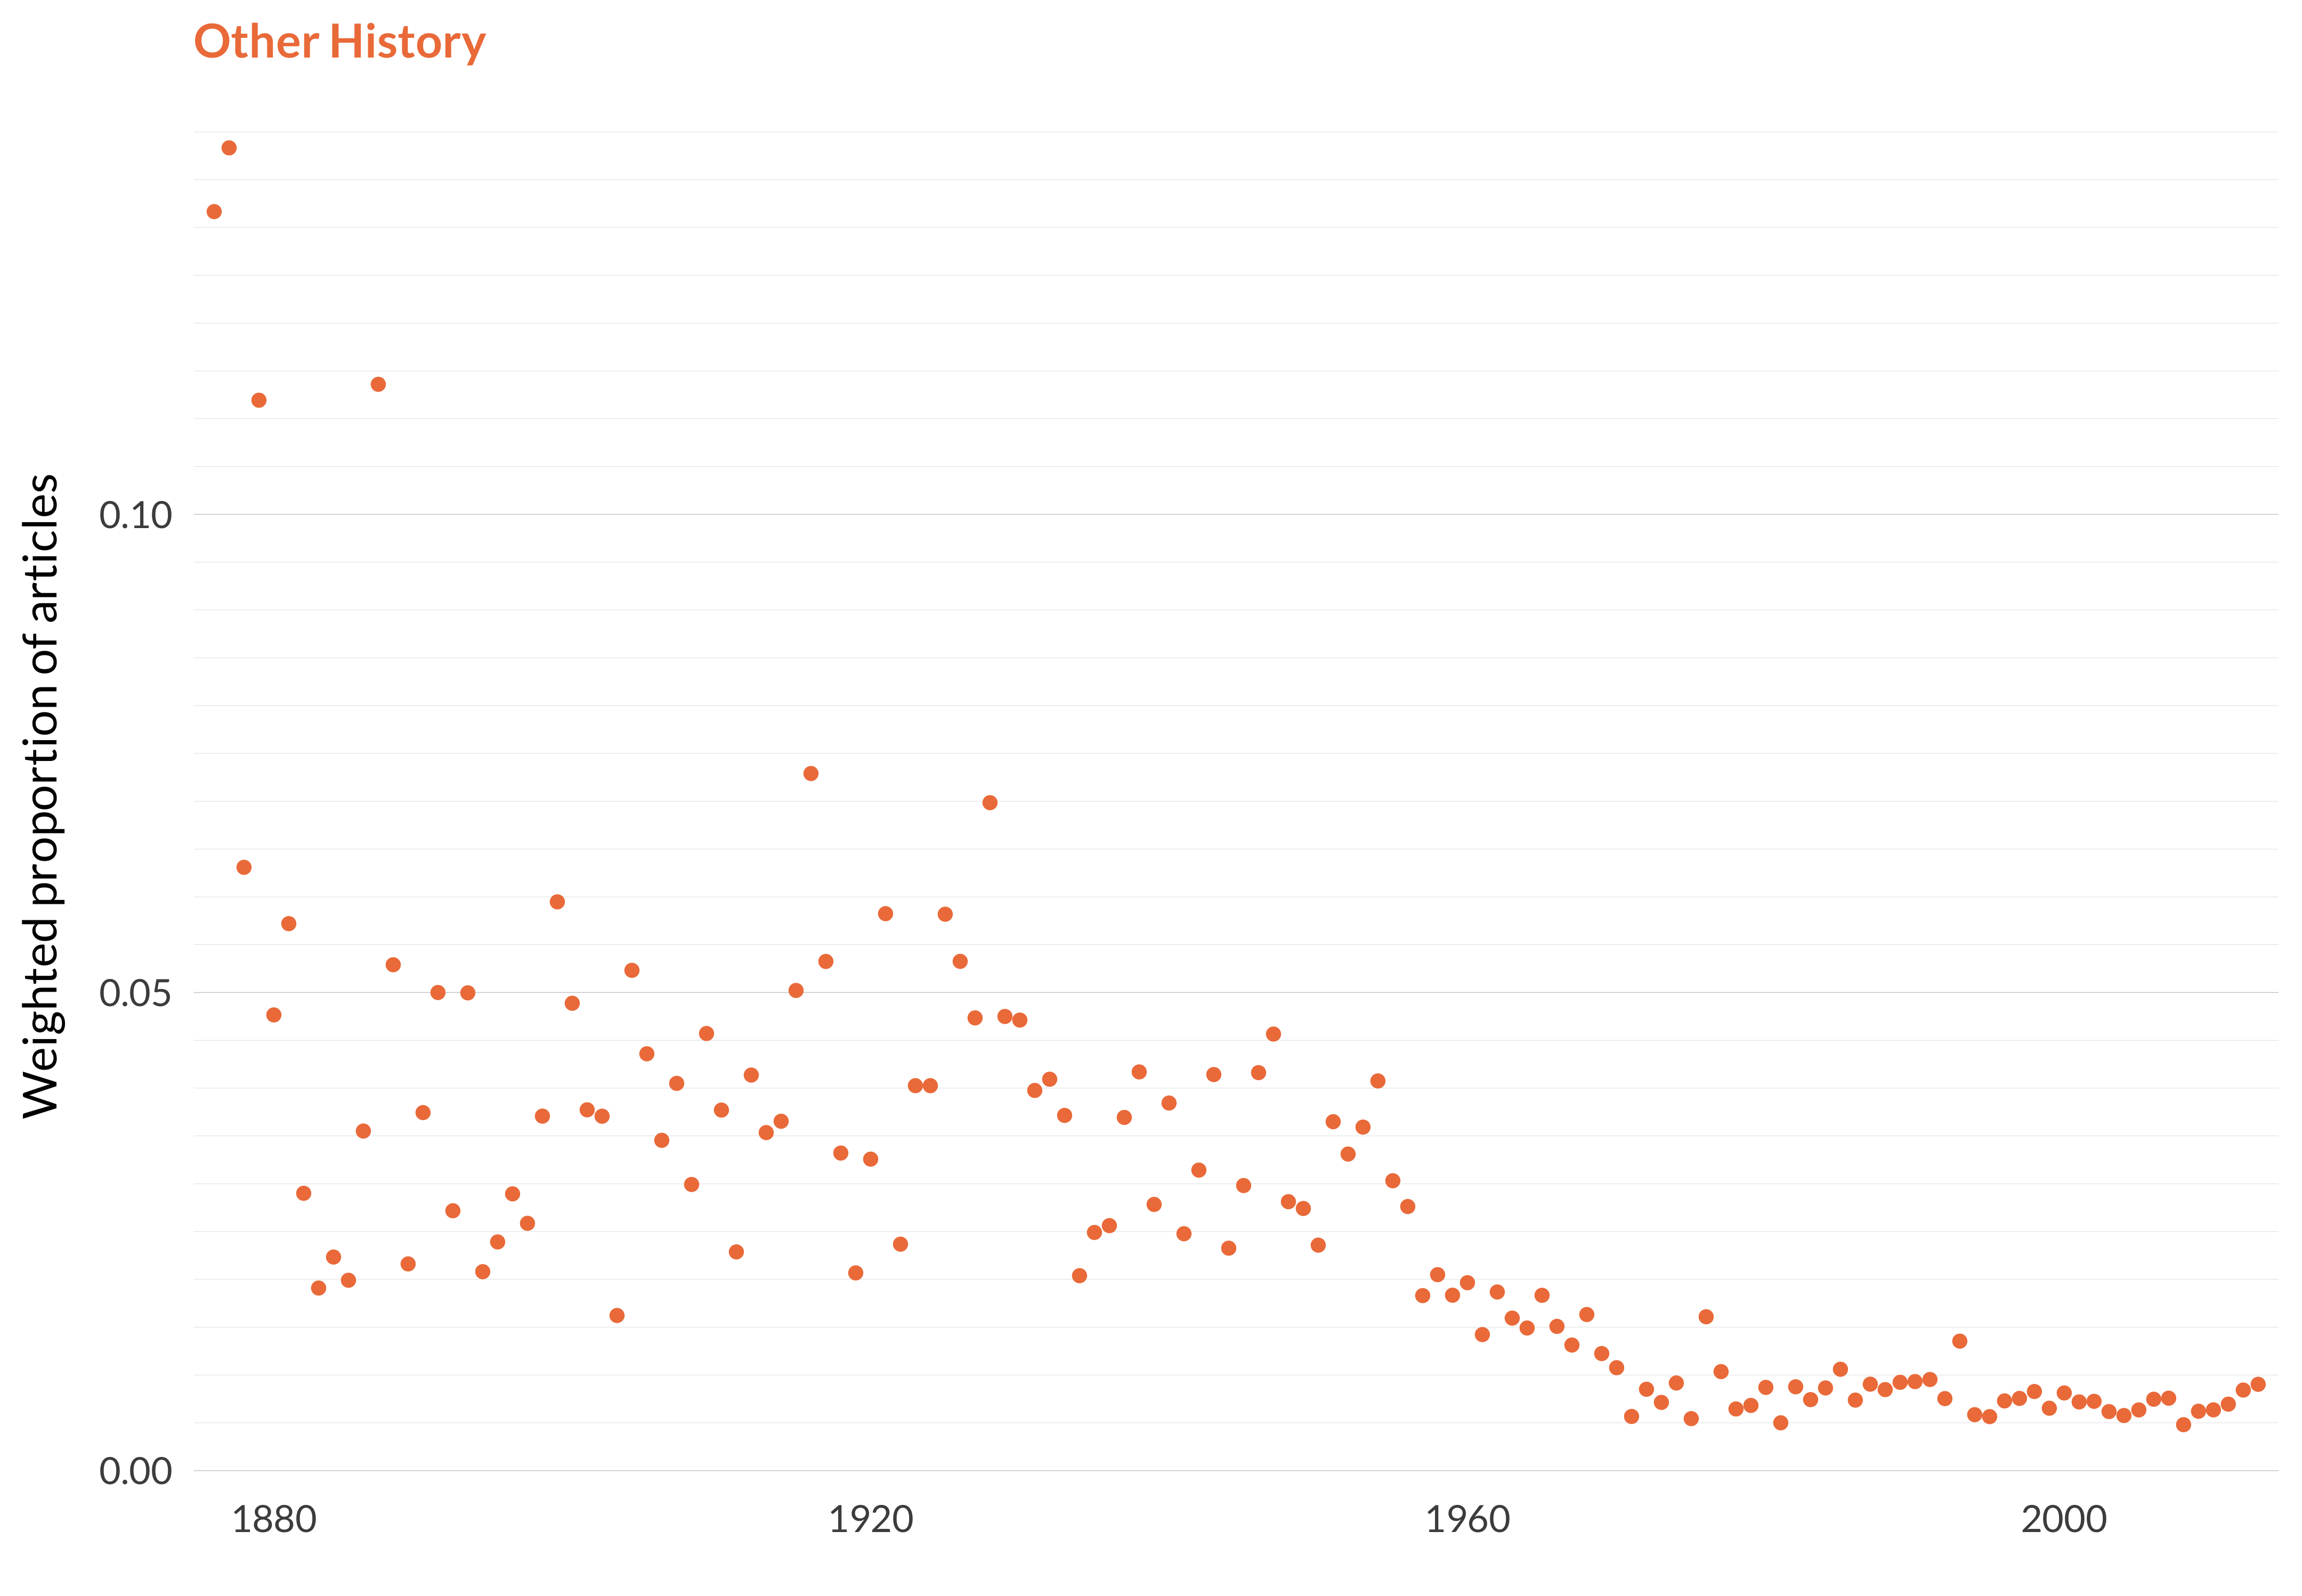 A scatterplot showing which proportion of articles each year are in the other historytopic. The x-axis shows the year, the y-axis measures the proportion of articles each year in this topic. There is one dot per year. The highest value is in 1877 when 13.8% of articles were in this topic. The lowest value is in 2008 when 0.5% of articles were in this topic. The full table that provides the data for this graph is available in Table A.4 in Appendix A.